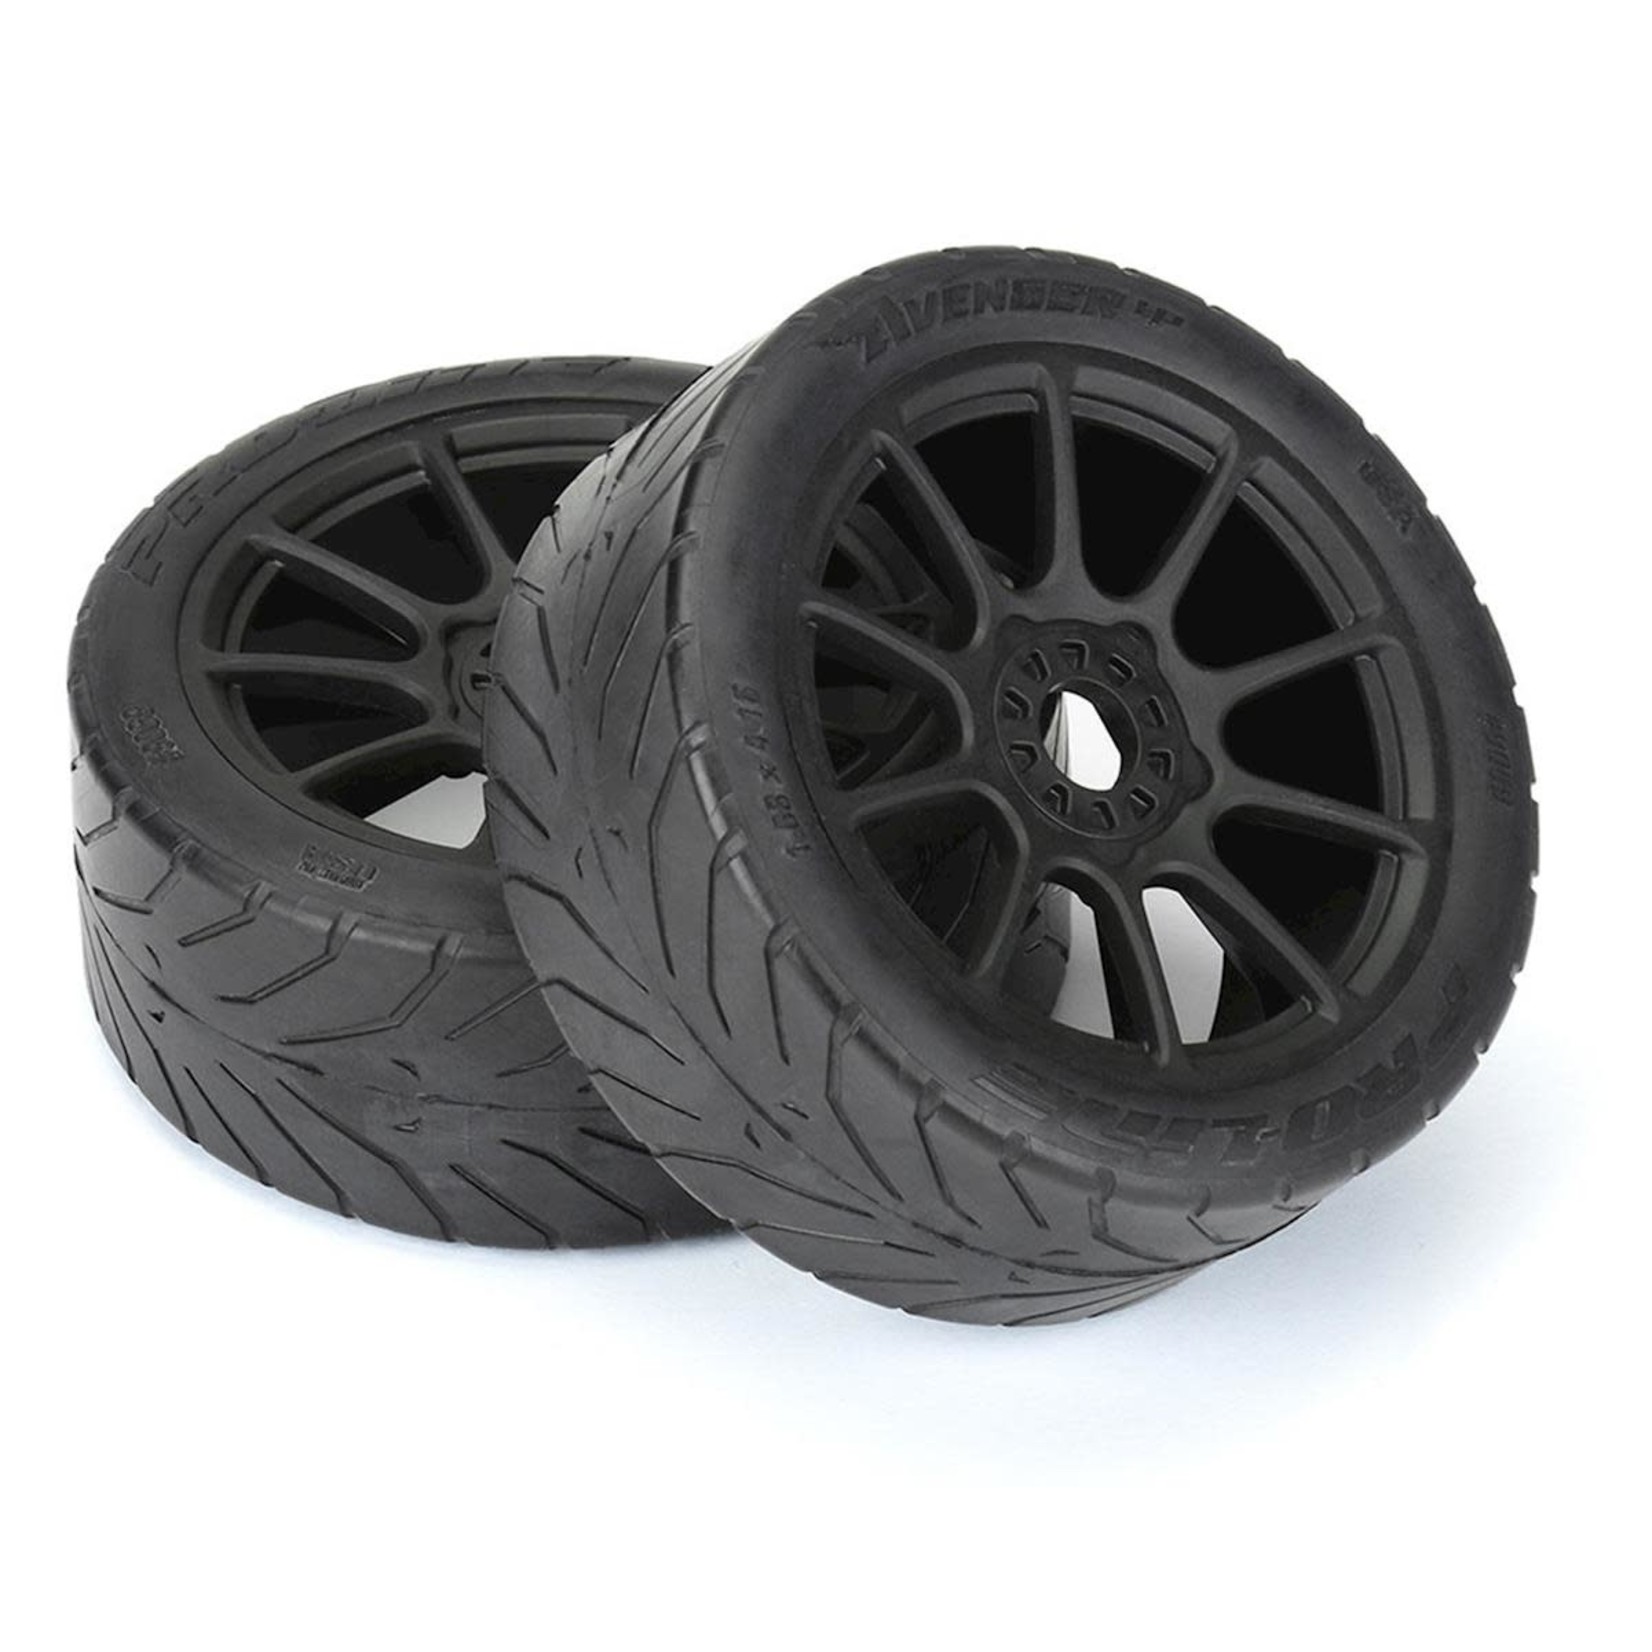 Pro-Line Pro-Line Avenger HP Belted Pre-Mounted 1/8 Buggy Tires (2) (Black) (S3) w/Mach 10 Wheel #9069-21